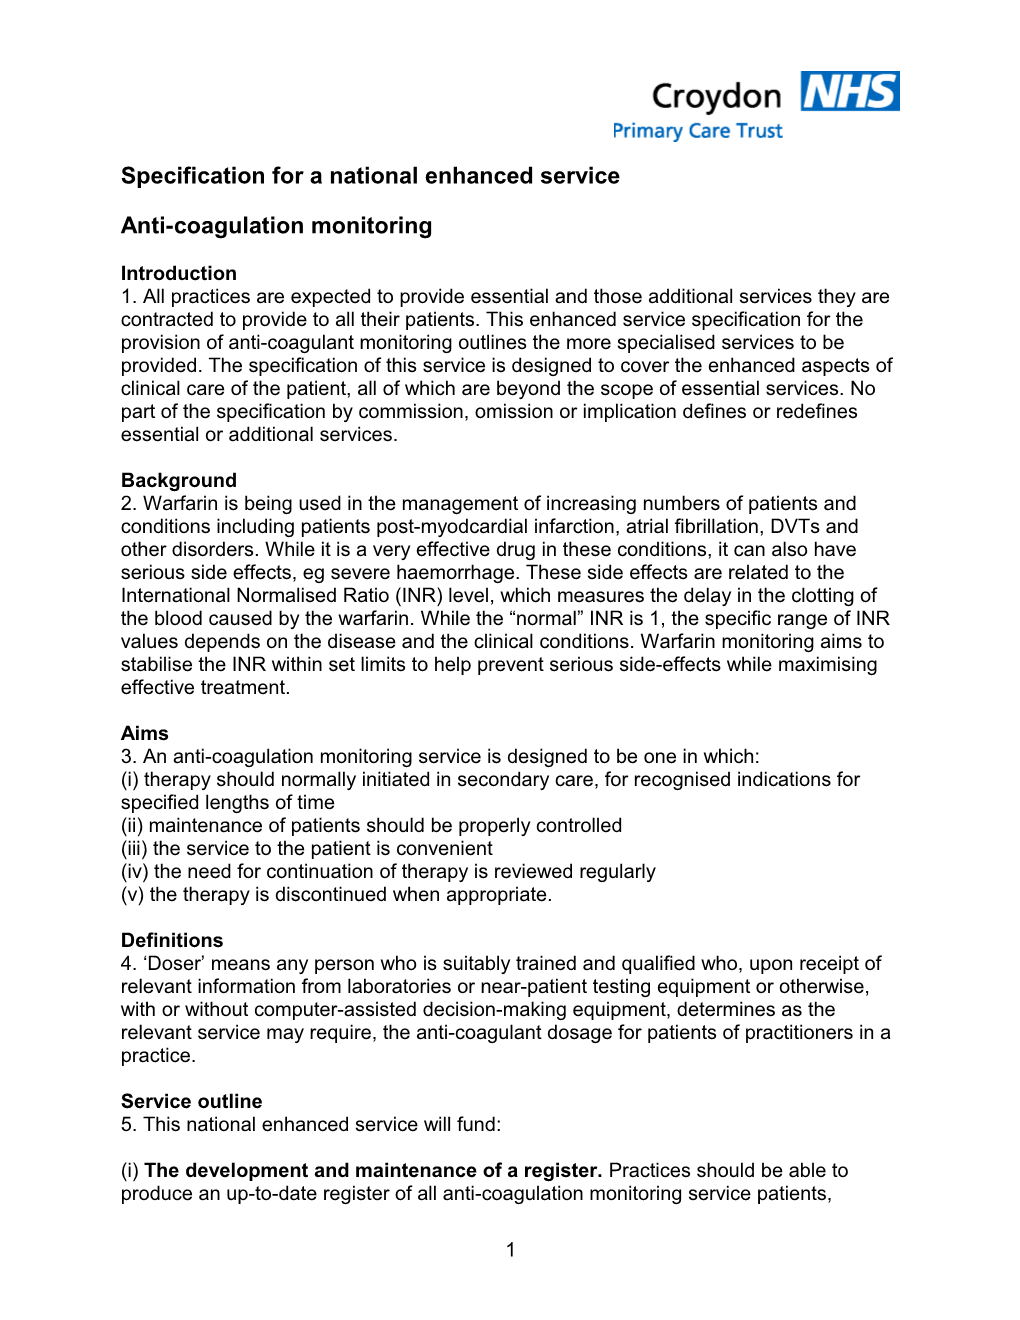 Specification for a National Enhanced Service